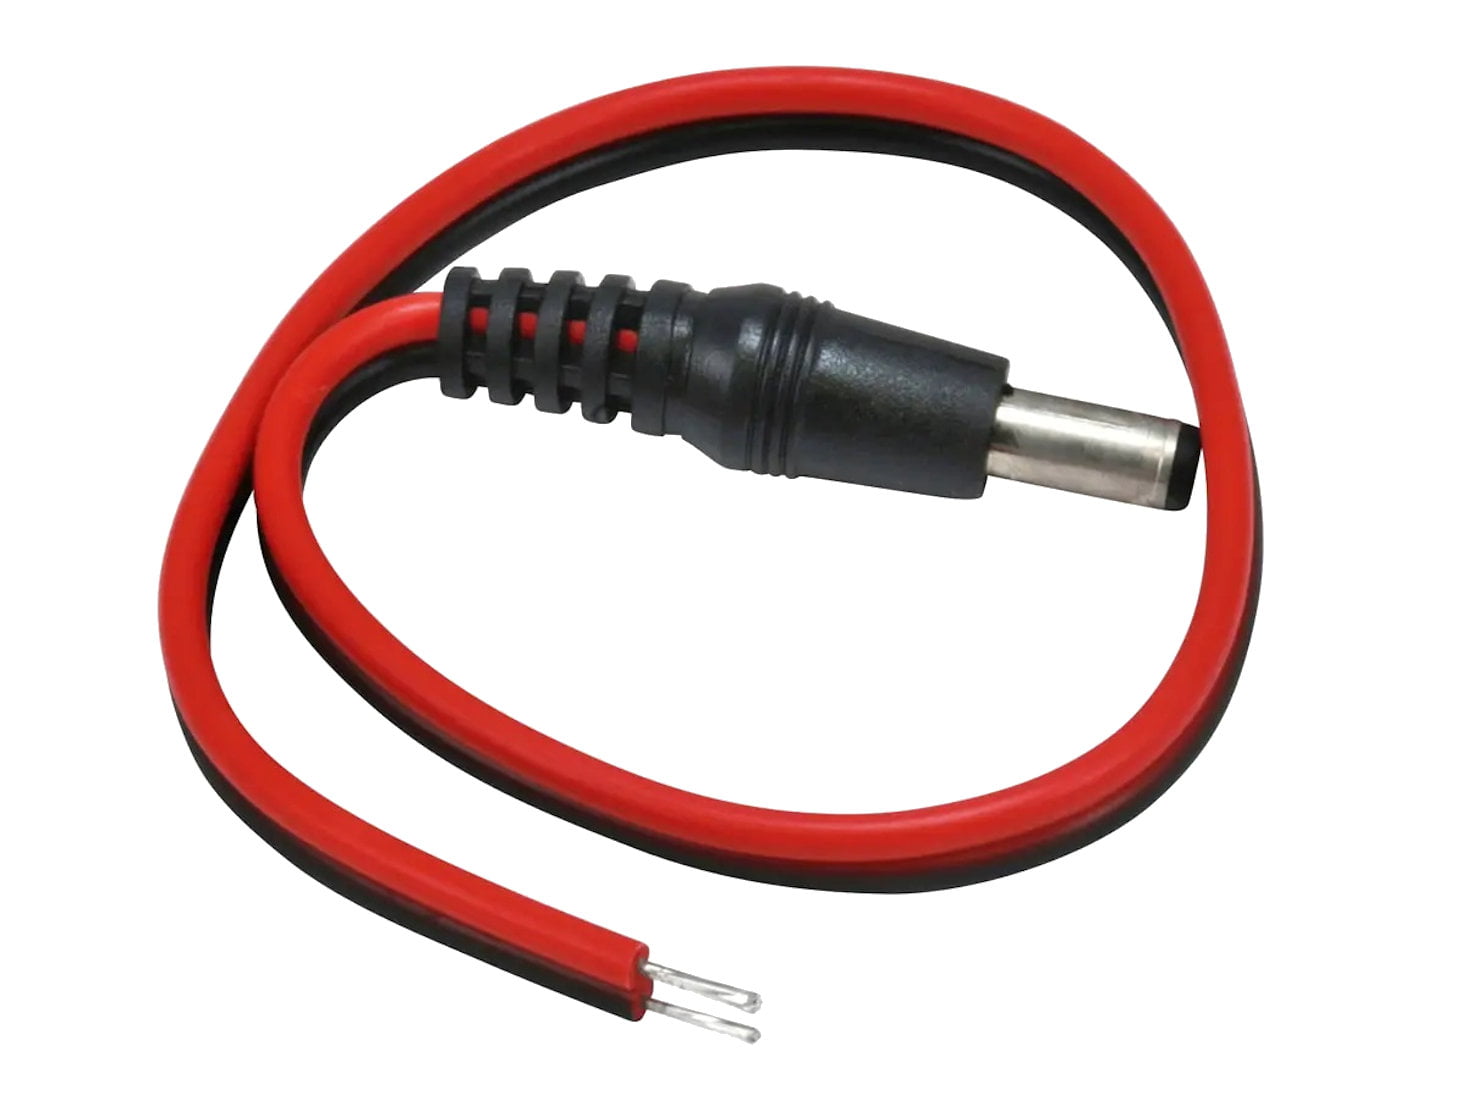 TR-PIGTAIL DC 2.1 × 5.5mm Male Power Plug Pigtail for CCTV Security Systems.